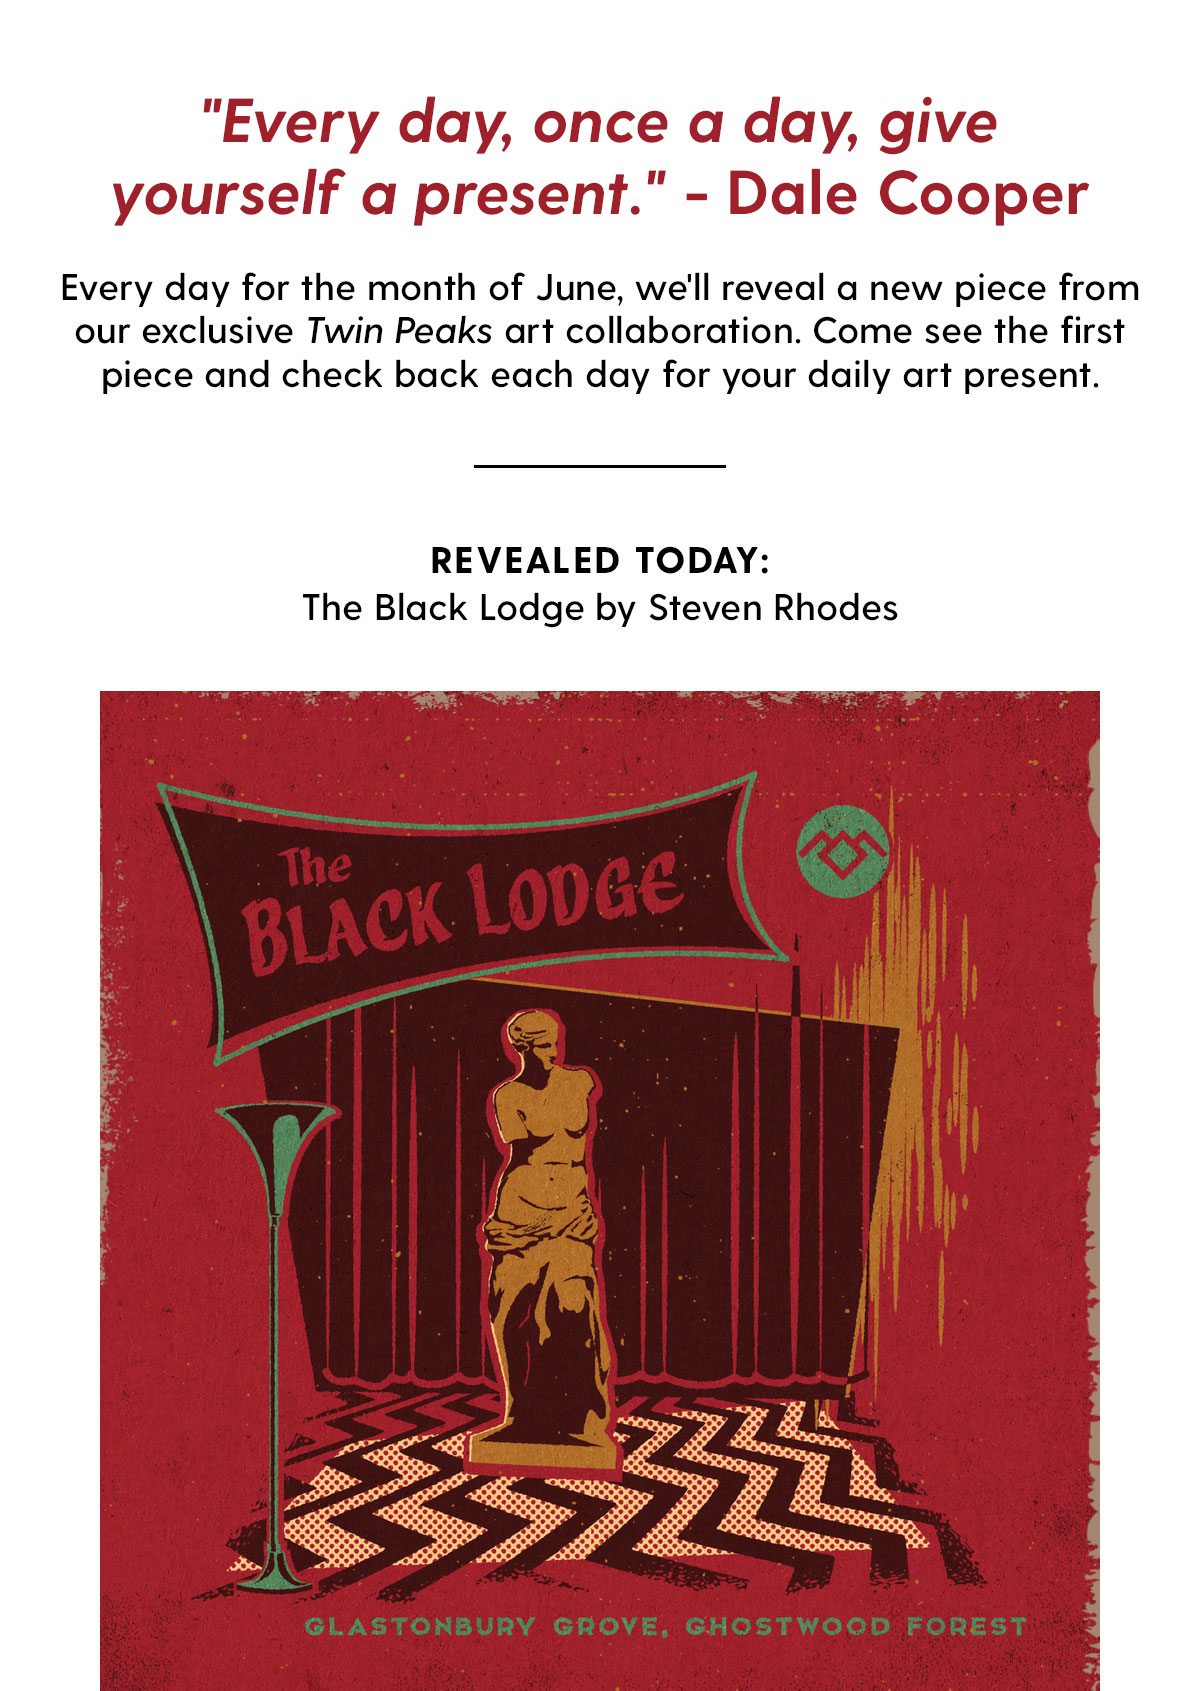 'Every day, once a day, give yourself a present' - Dale Cooper. Every day for the month of June, we'll reveal a new piece from our exclusive Twin Peaks art collaboration. Come see the first piece and check back each day for your daily art present. Revealed today: The Black Lodge by Steven Rhodes